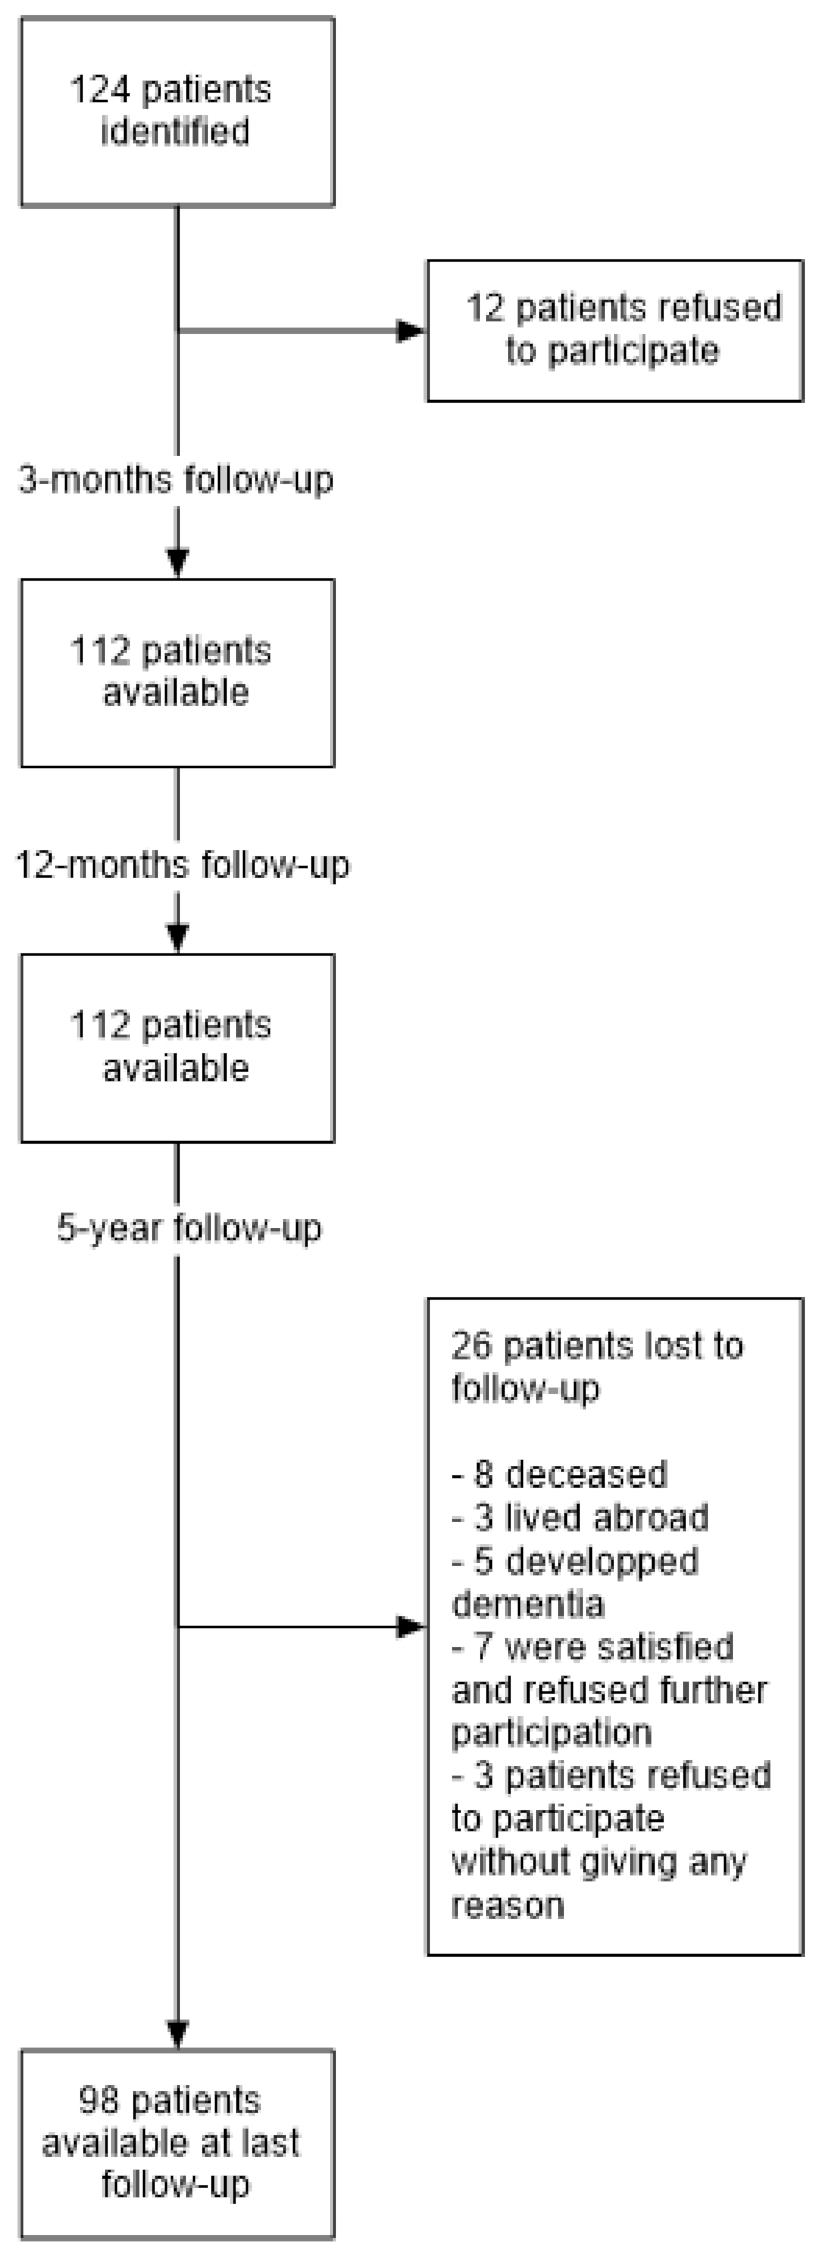 Mean and standard deviation (bars) of total cup migration in patients